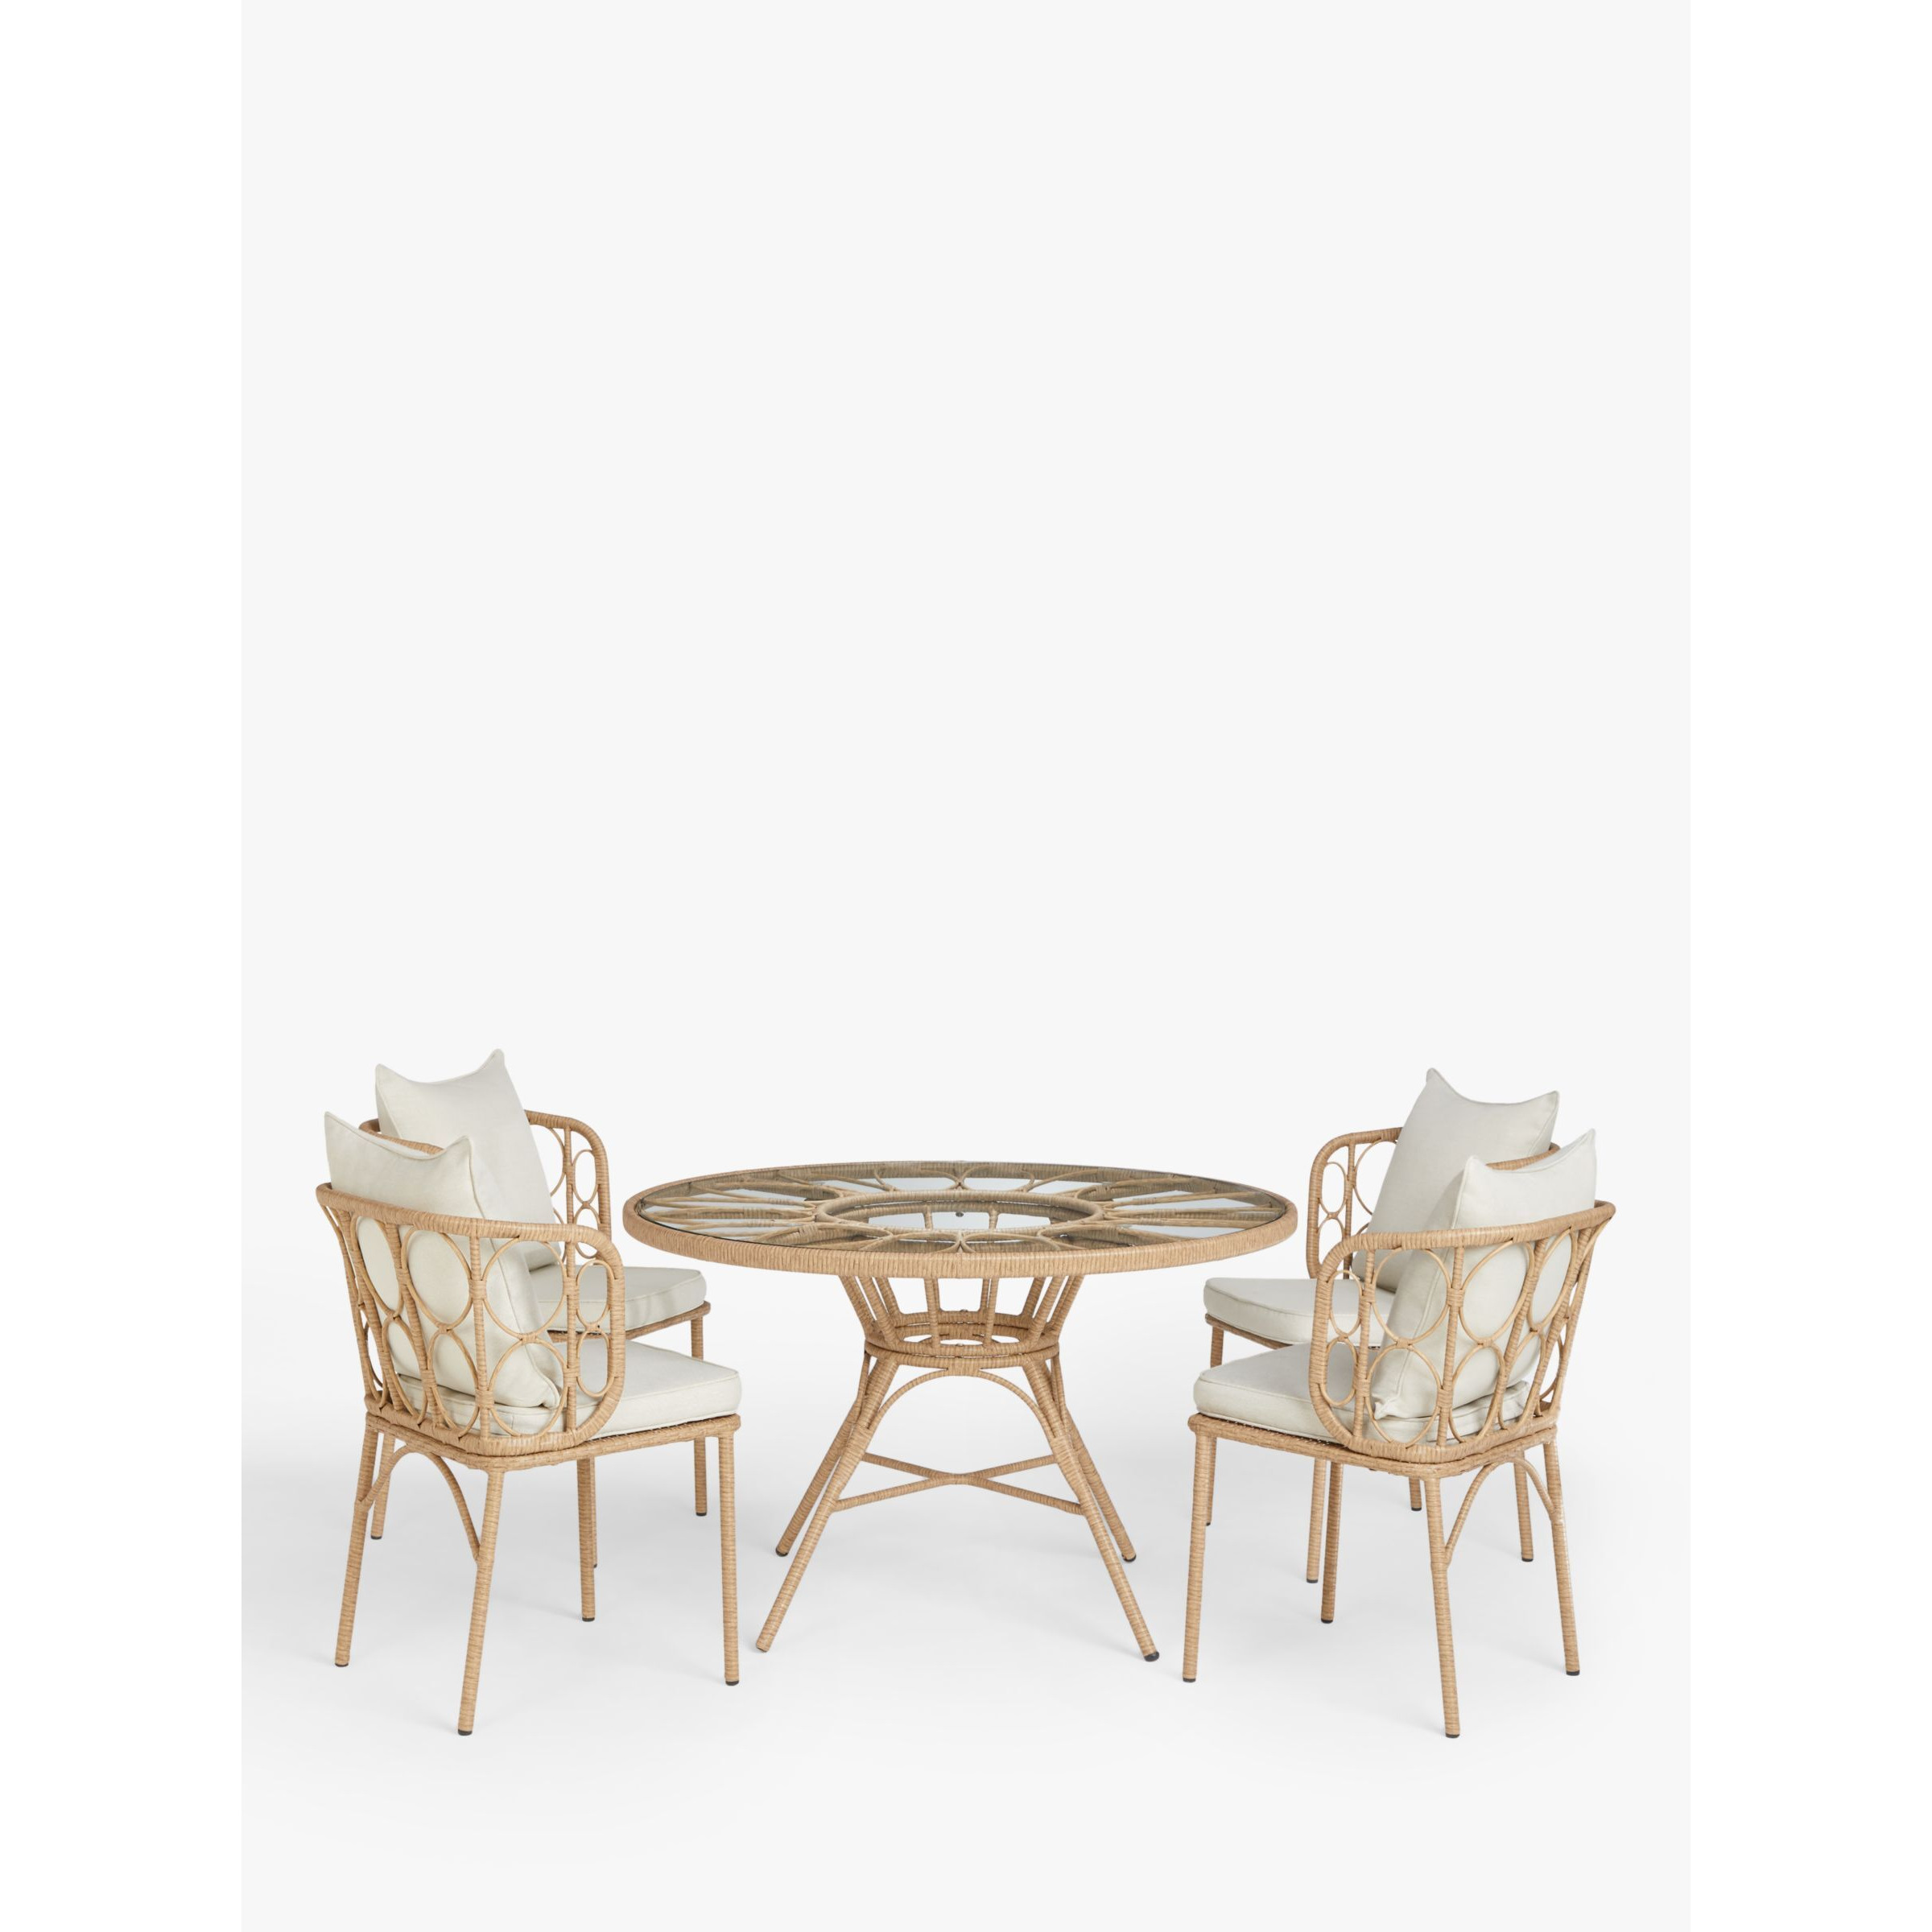 John Lewis Infinity Cane 4-Seater Round Garden Dining Table & Chairs Set, Natural - image 1